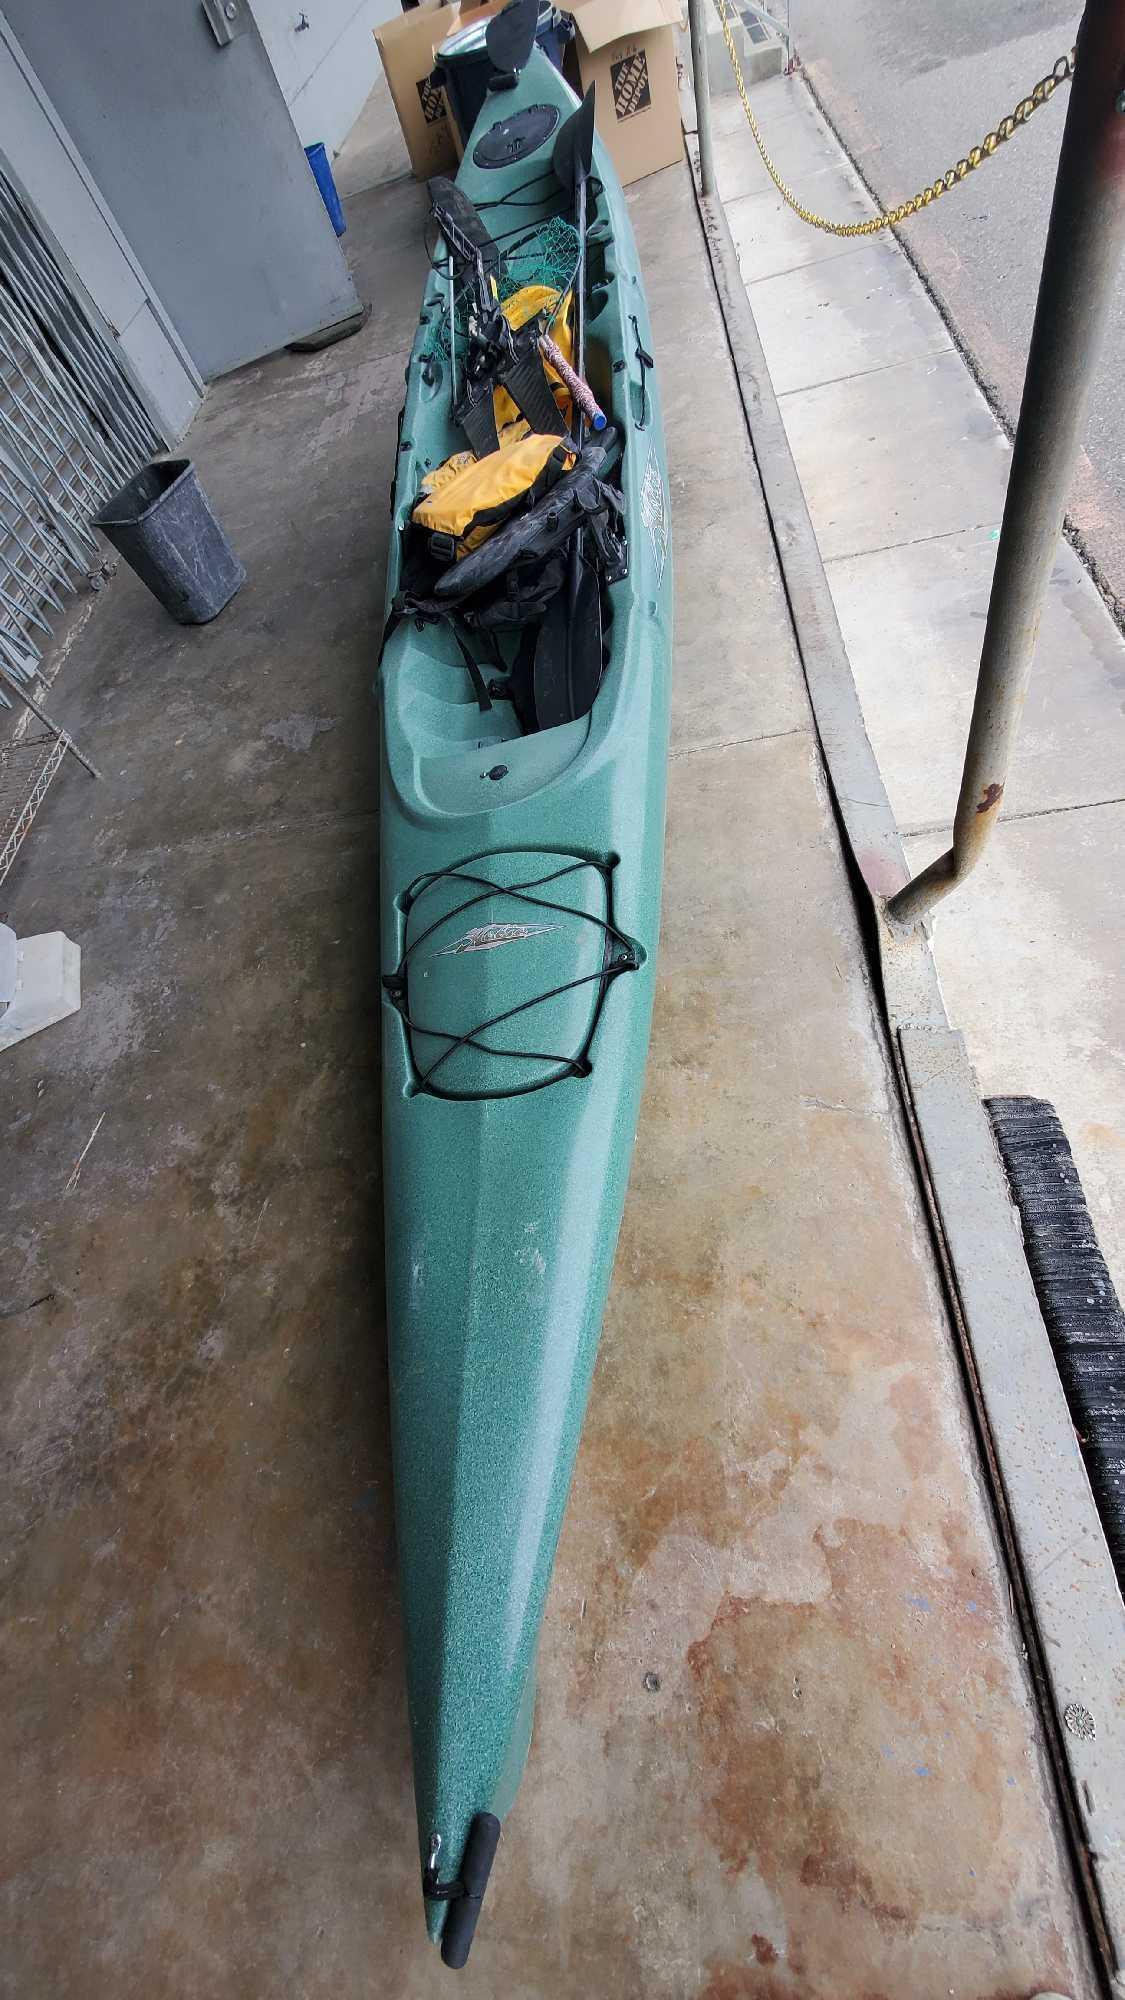 Hobie Mirage Adventure Fish Cannoe with gear and wheels stand